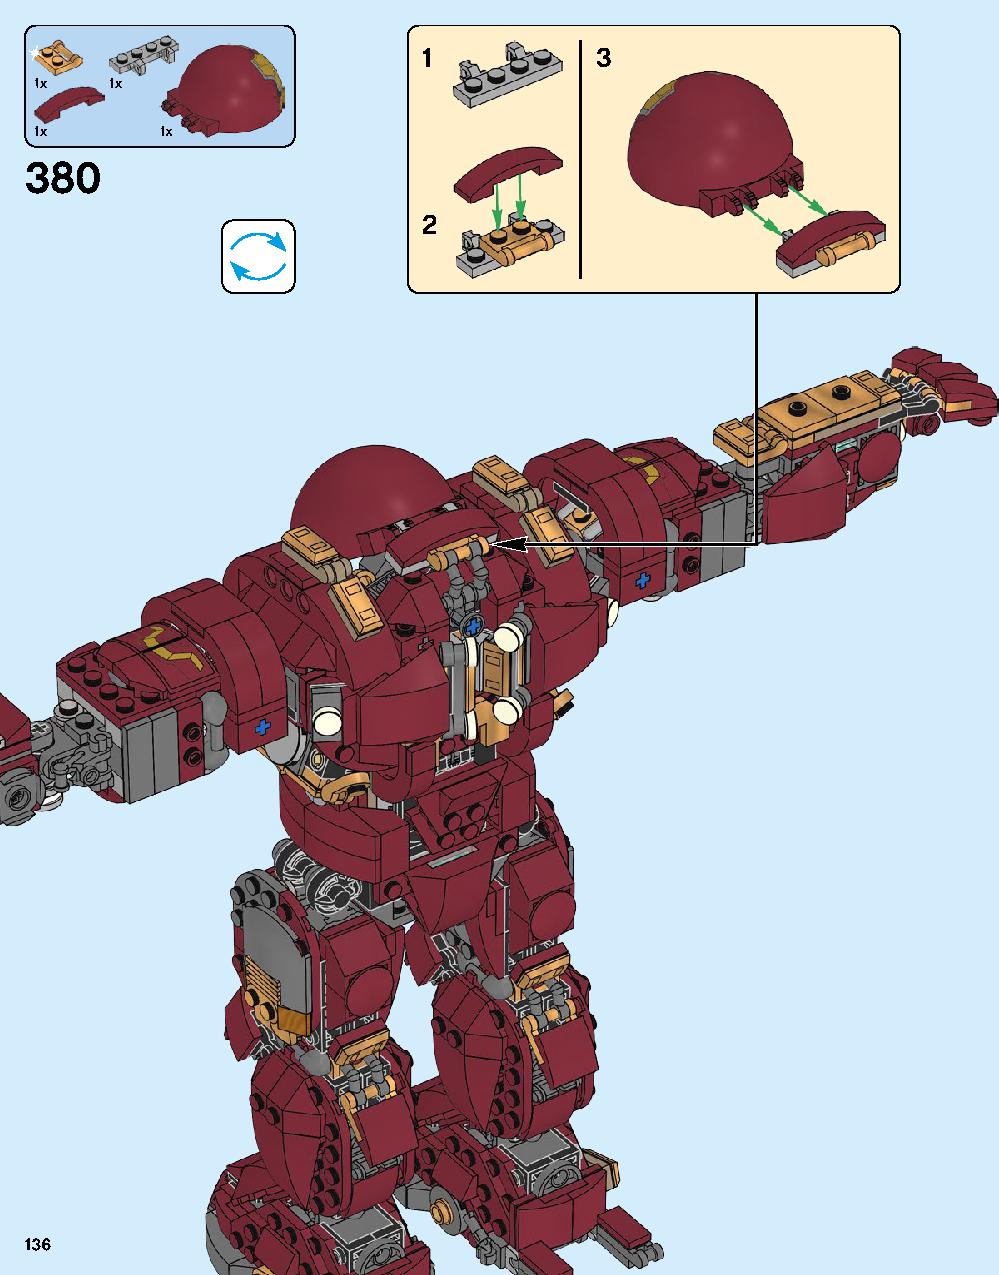 The Hulkbuster: Ultron Edition 76105 LEGO information LEGO instructions 136 page